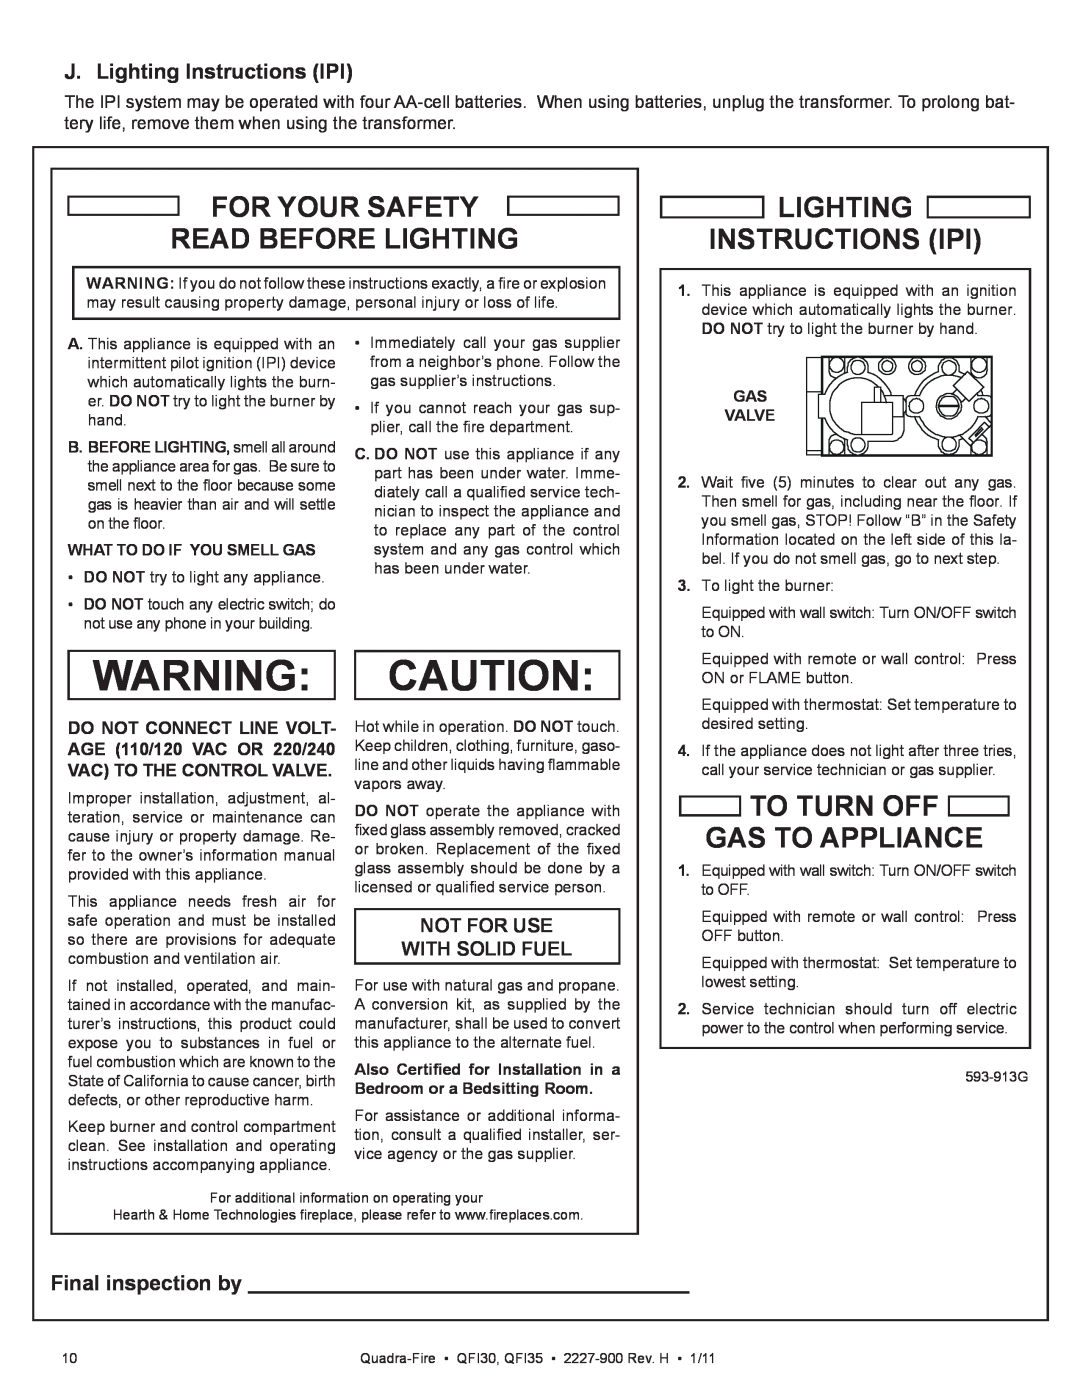 Quadra-Fire QF130 J. Lighting Instructions IPI, Final inspection by, For Your Safety Read Before Lighting, Gas Valve 